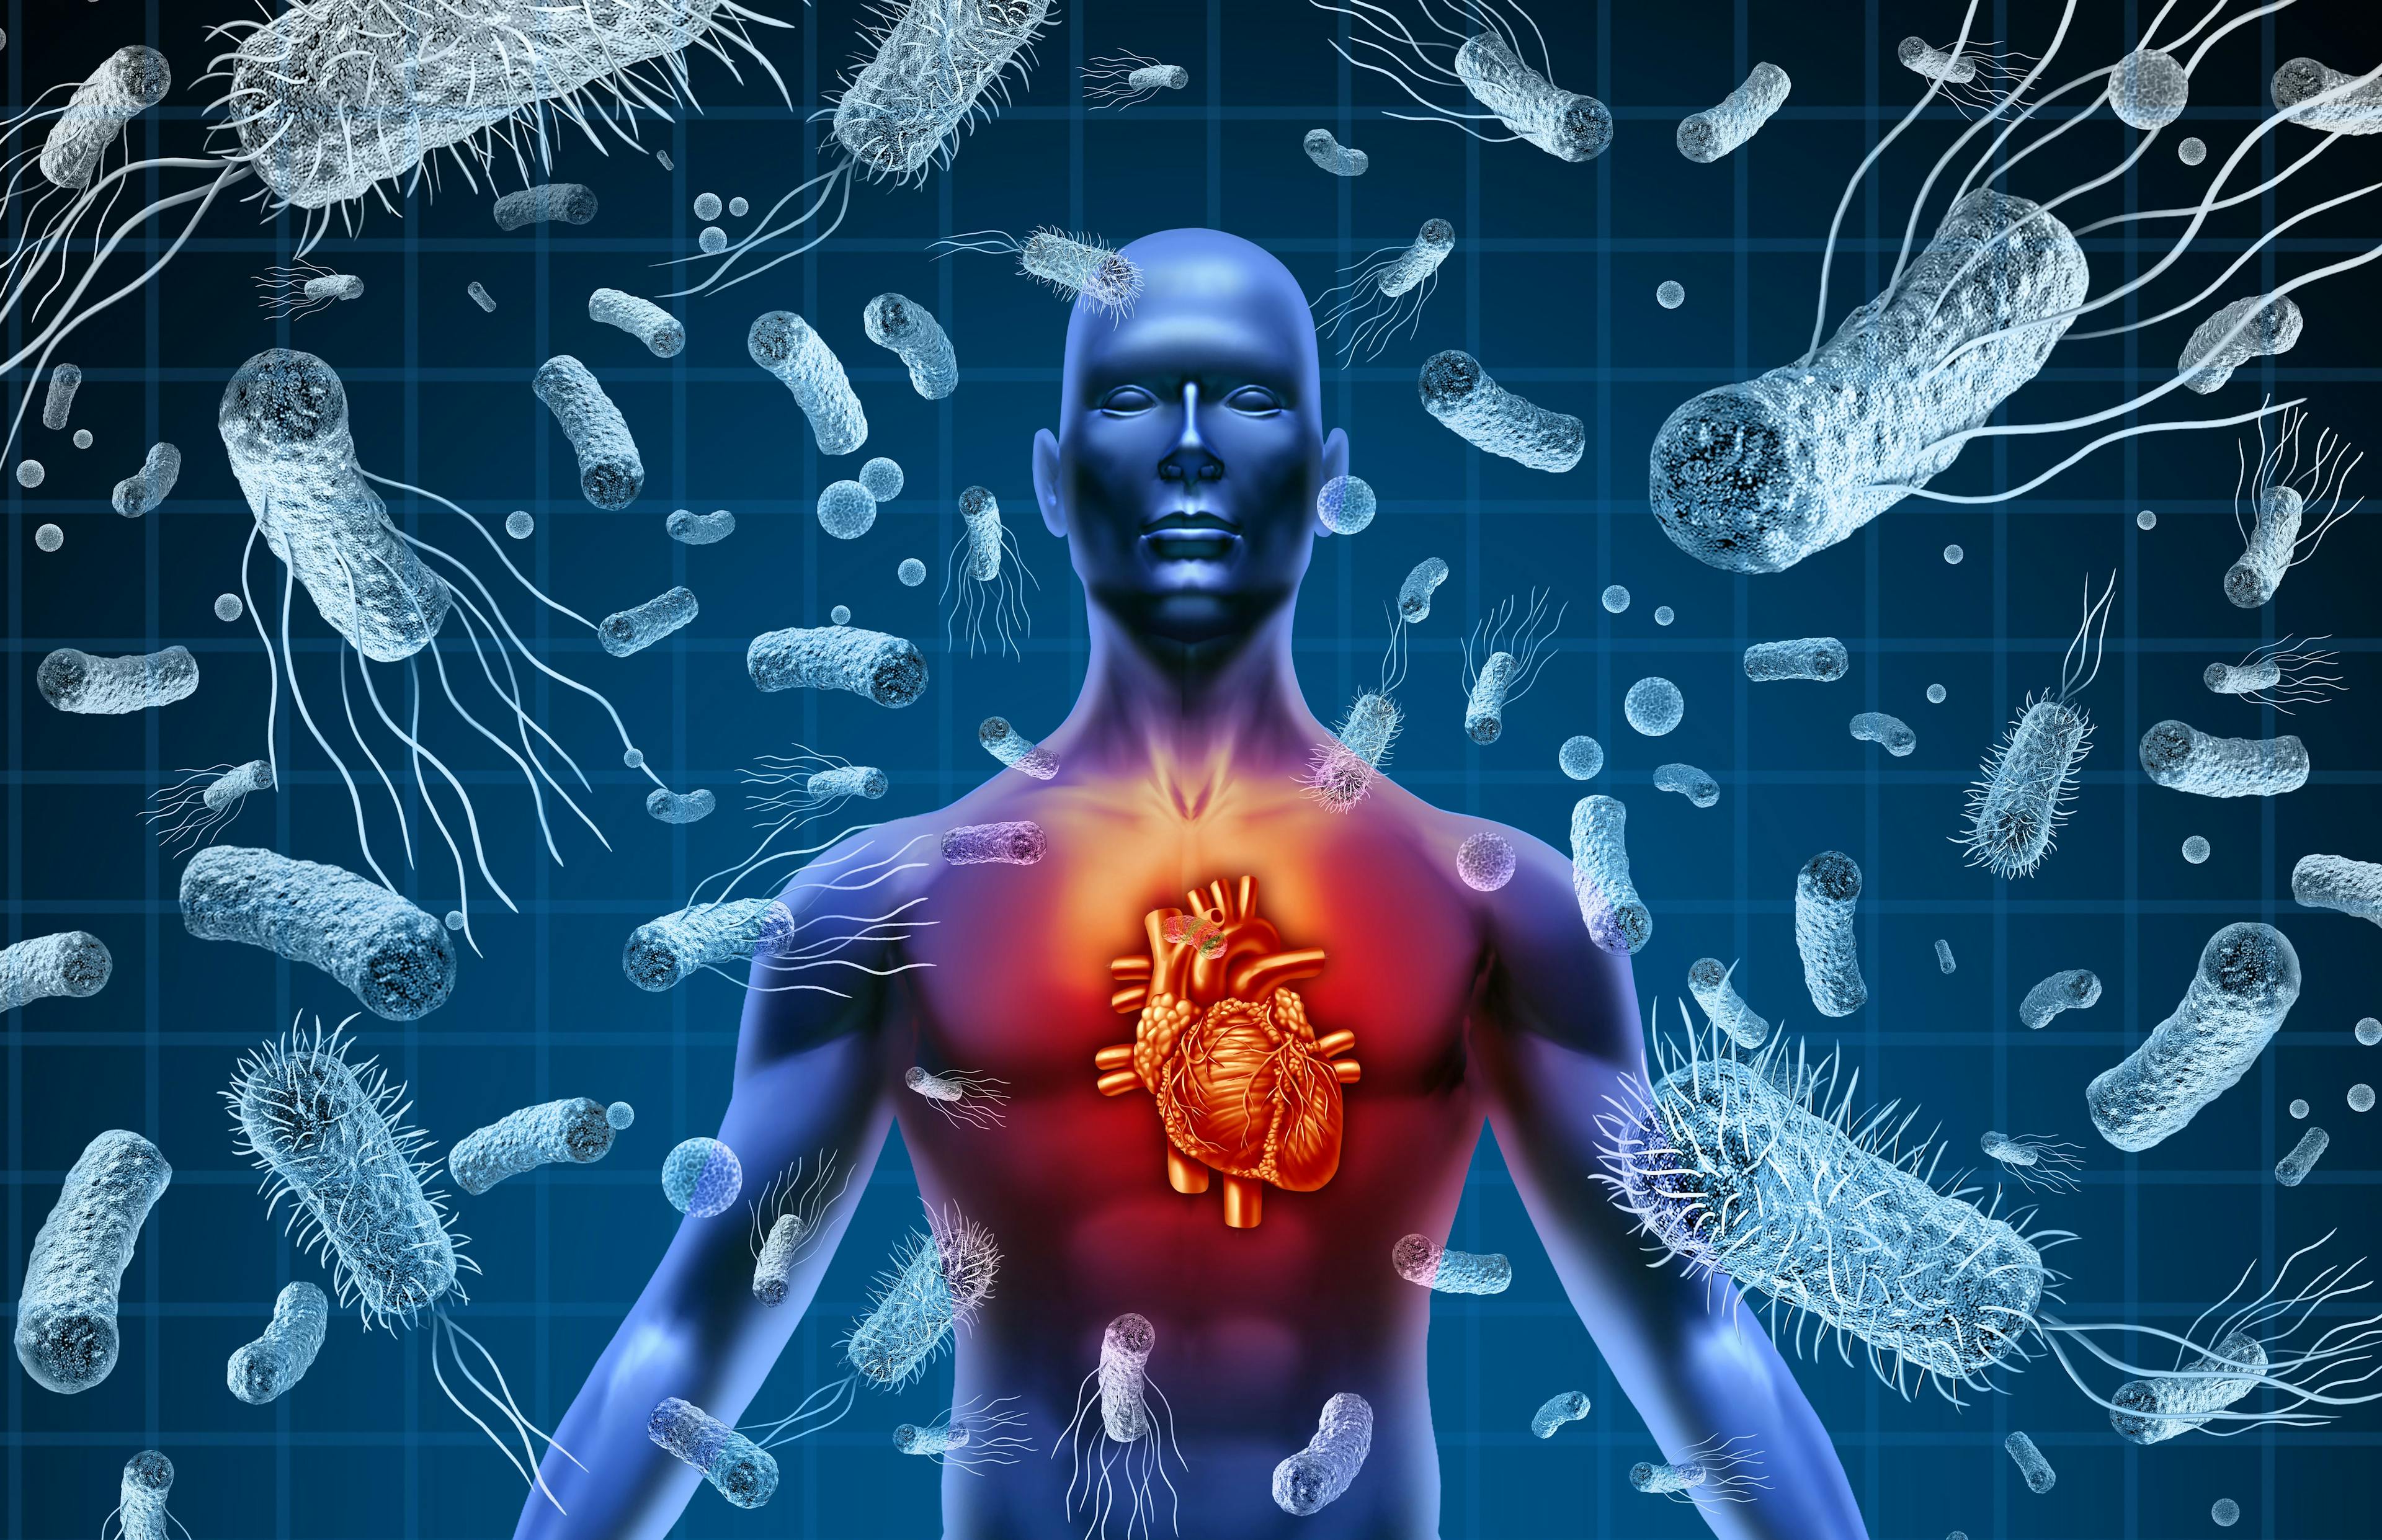 Heart And Bacteria or Bacterial Endocarditis and septicemia or sepsis as blood poisoning due to germs with 3D illustration elements. Image Credit: Adobe Stock Images/freshidea